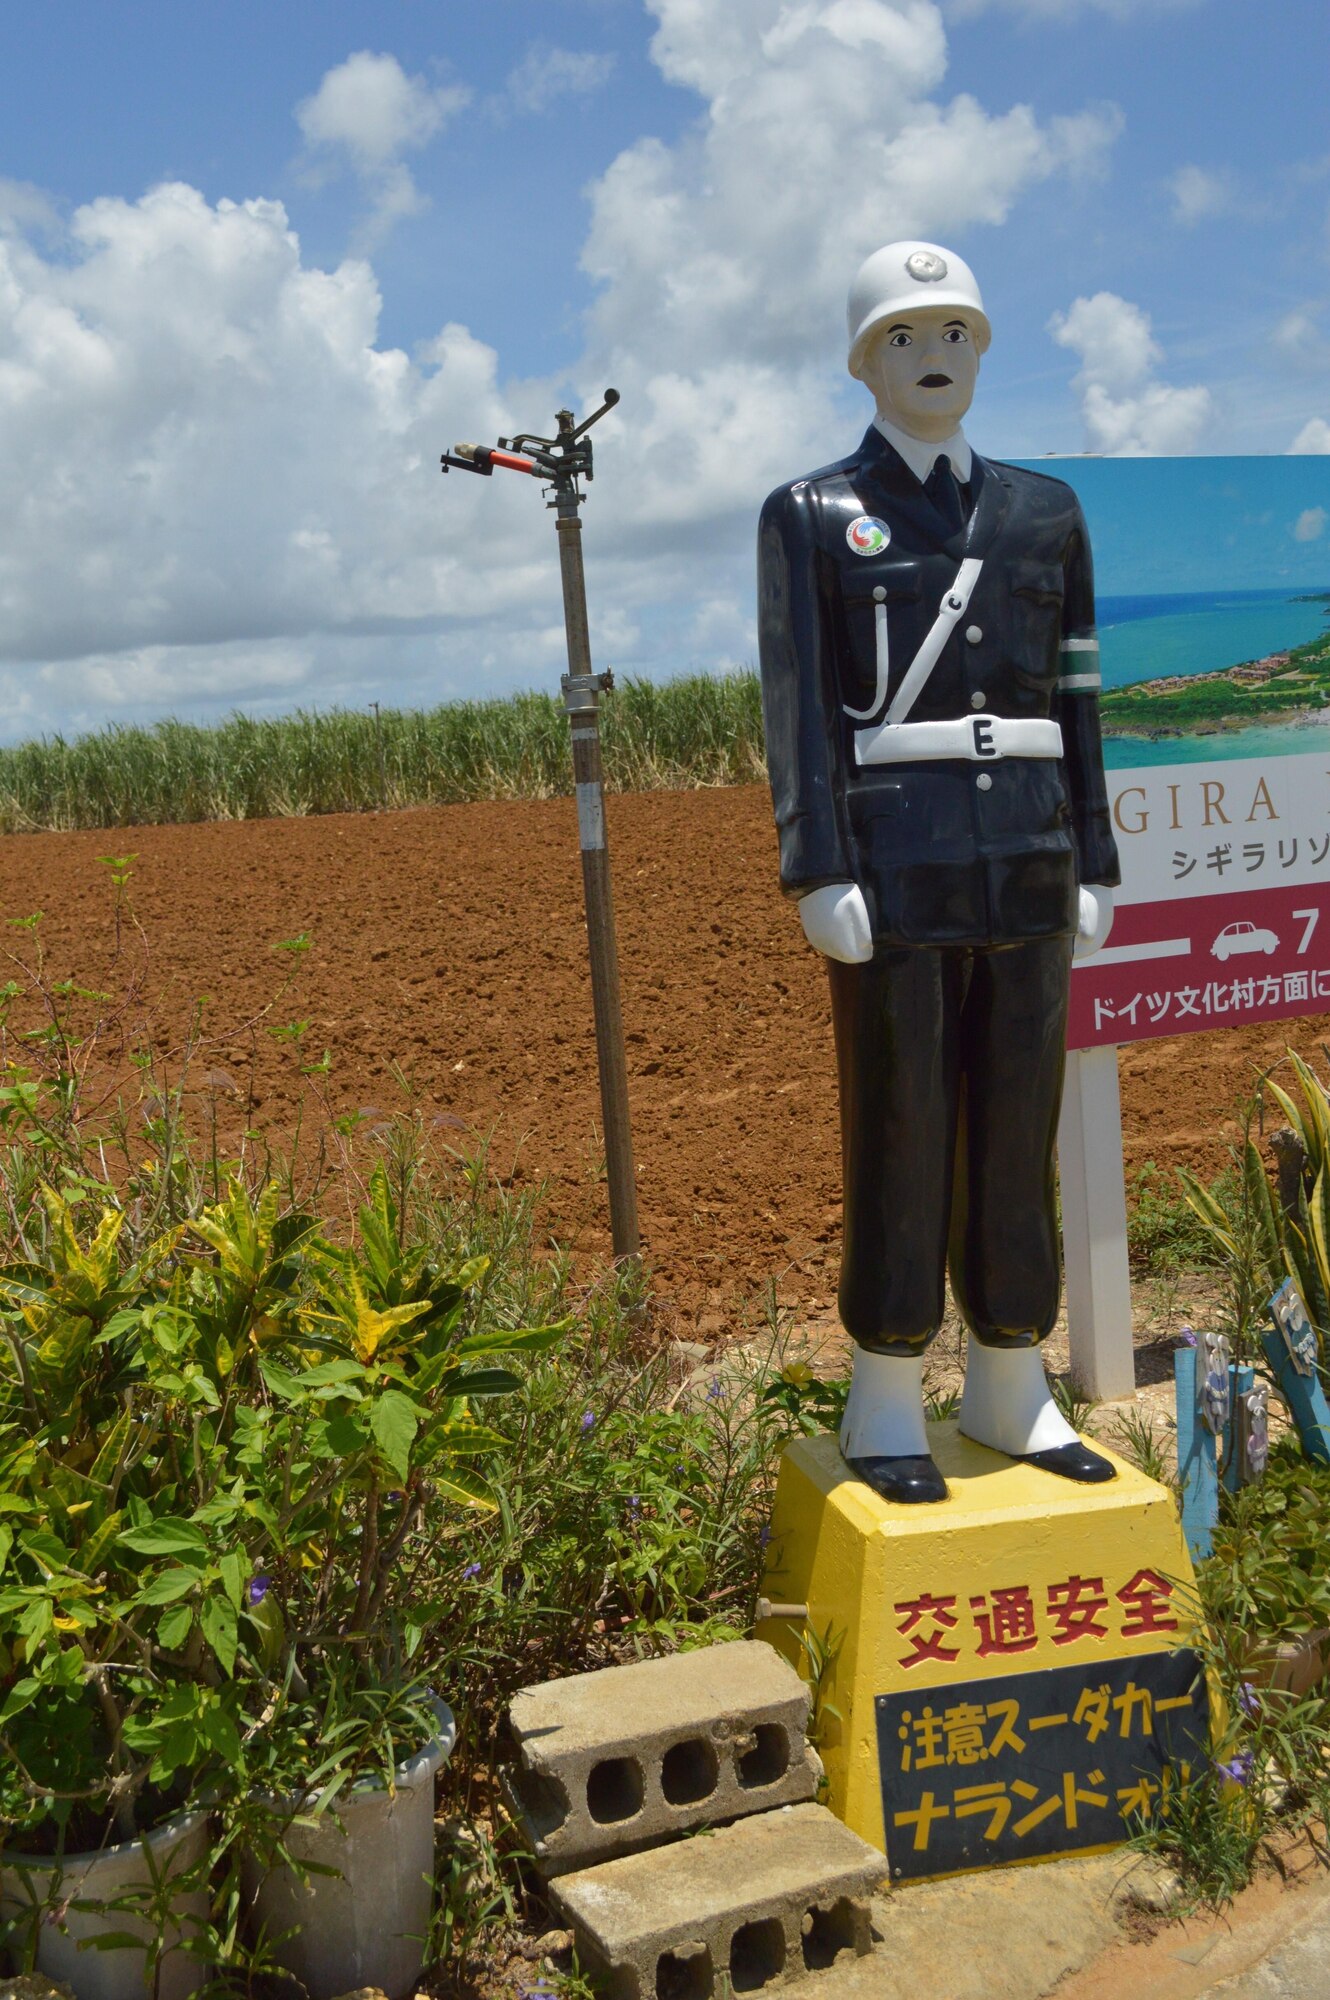 One of the 19 Mamoru-Kun figurines is displayed next to a sugarcane field on Miyako-Jima, Okinawa, Japan. The figures are decorated in a police uniform to spread traffic safety awareness throughout the island for more than 20 years. (courtesy photo)